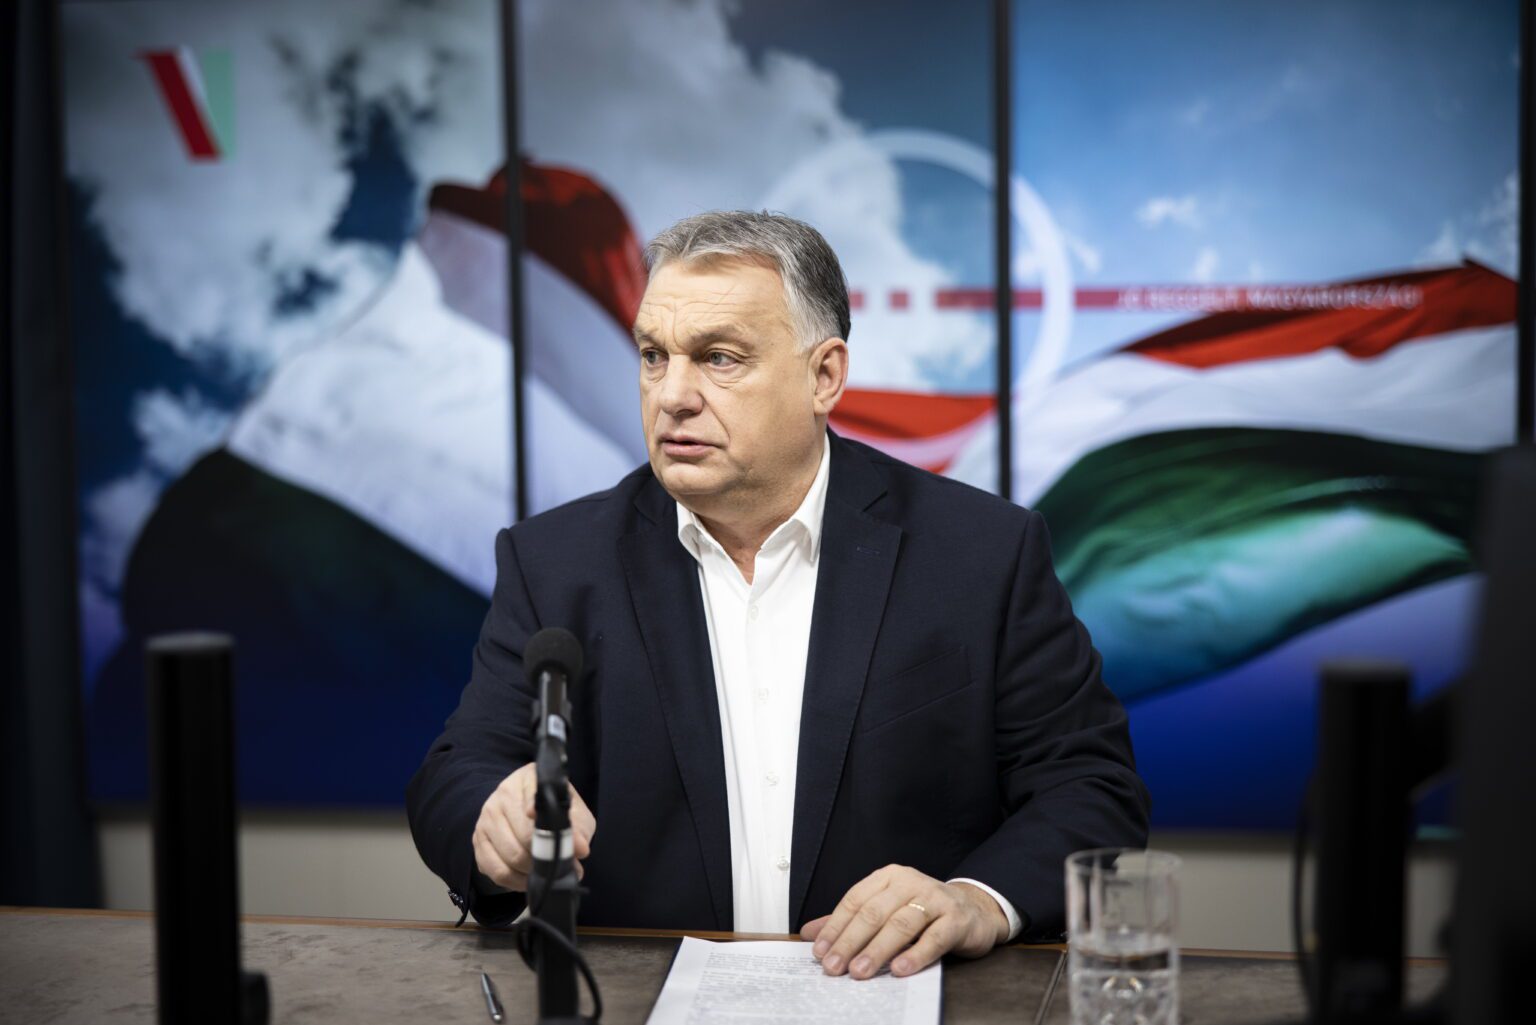 Orbán: Brussels Wanted a Change of Government and Is Now Punishing Hungary